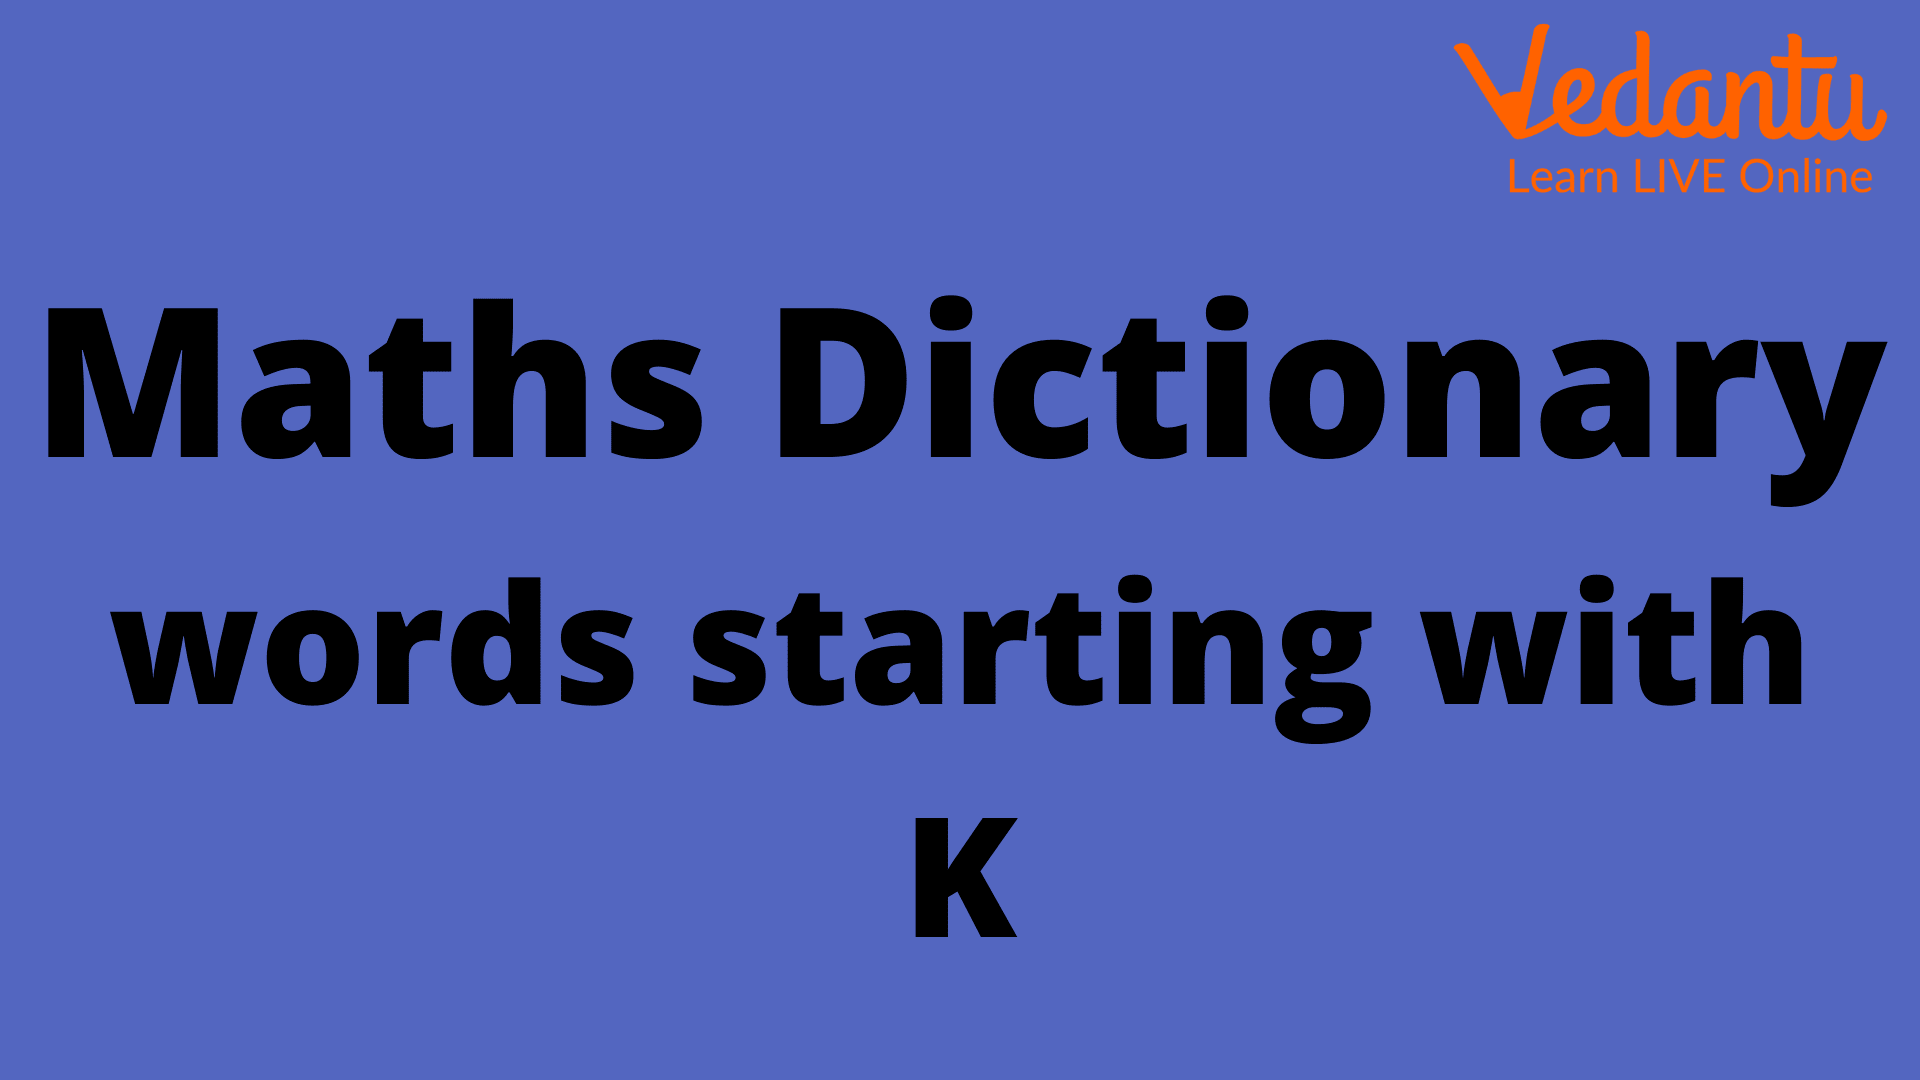 Math words starting with K